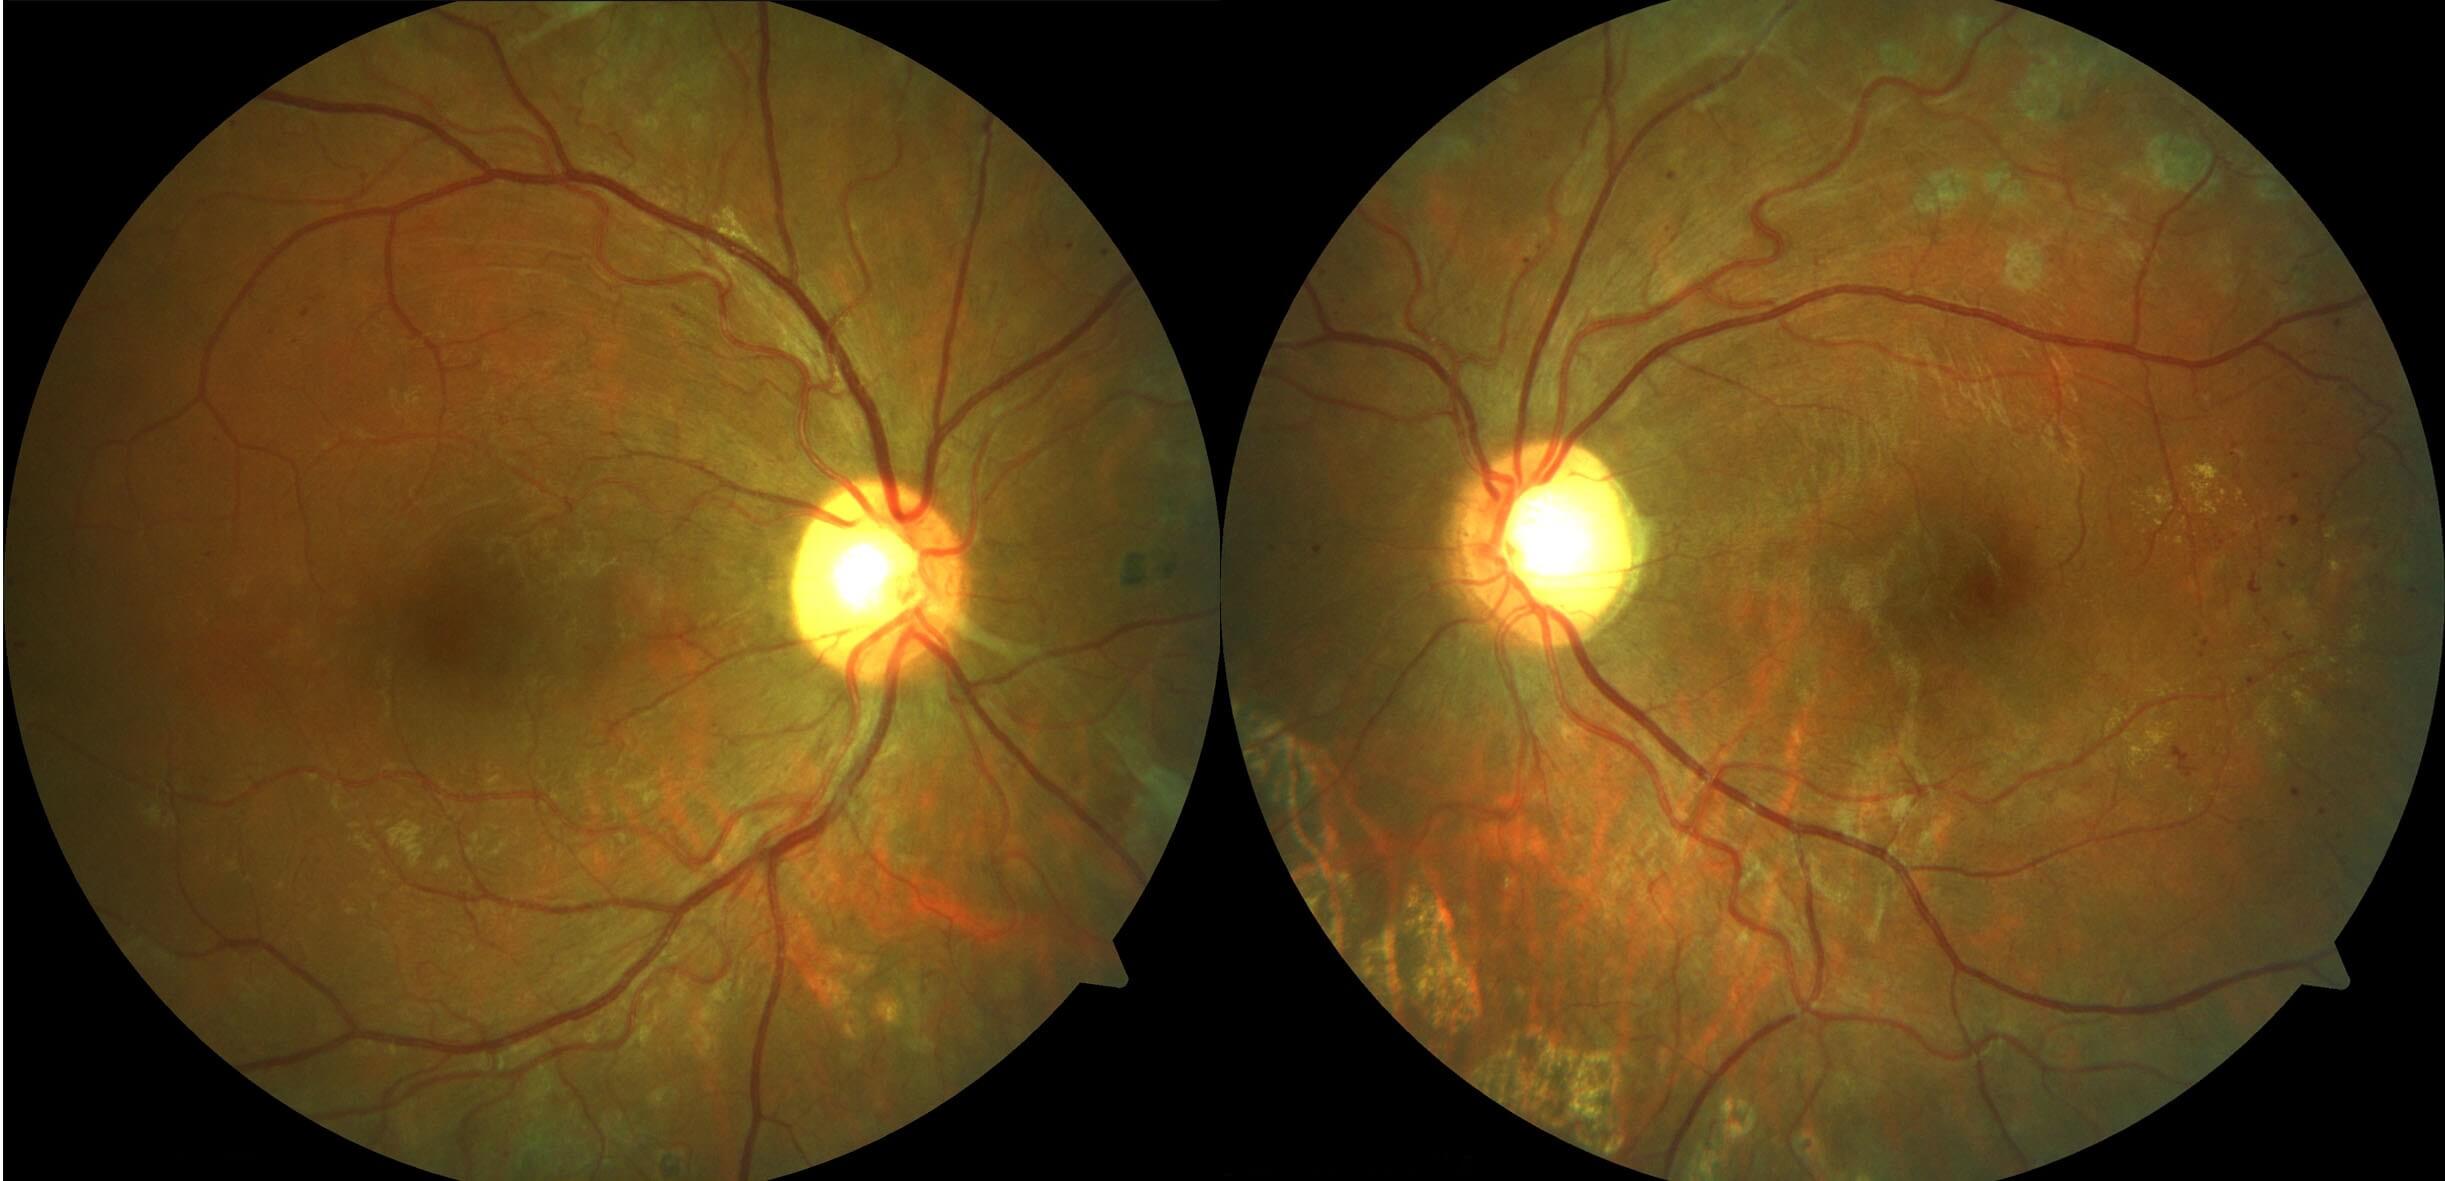 Colour fundus photographs demonstrating regression of the new vessels following peripheral panretinal photocoagulation. Note the peripheral laser scars.